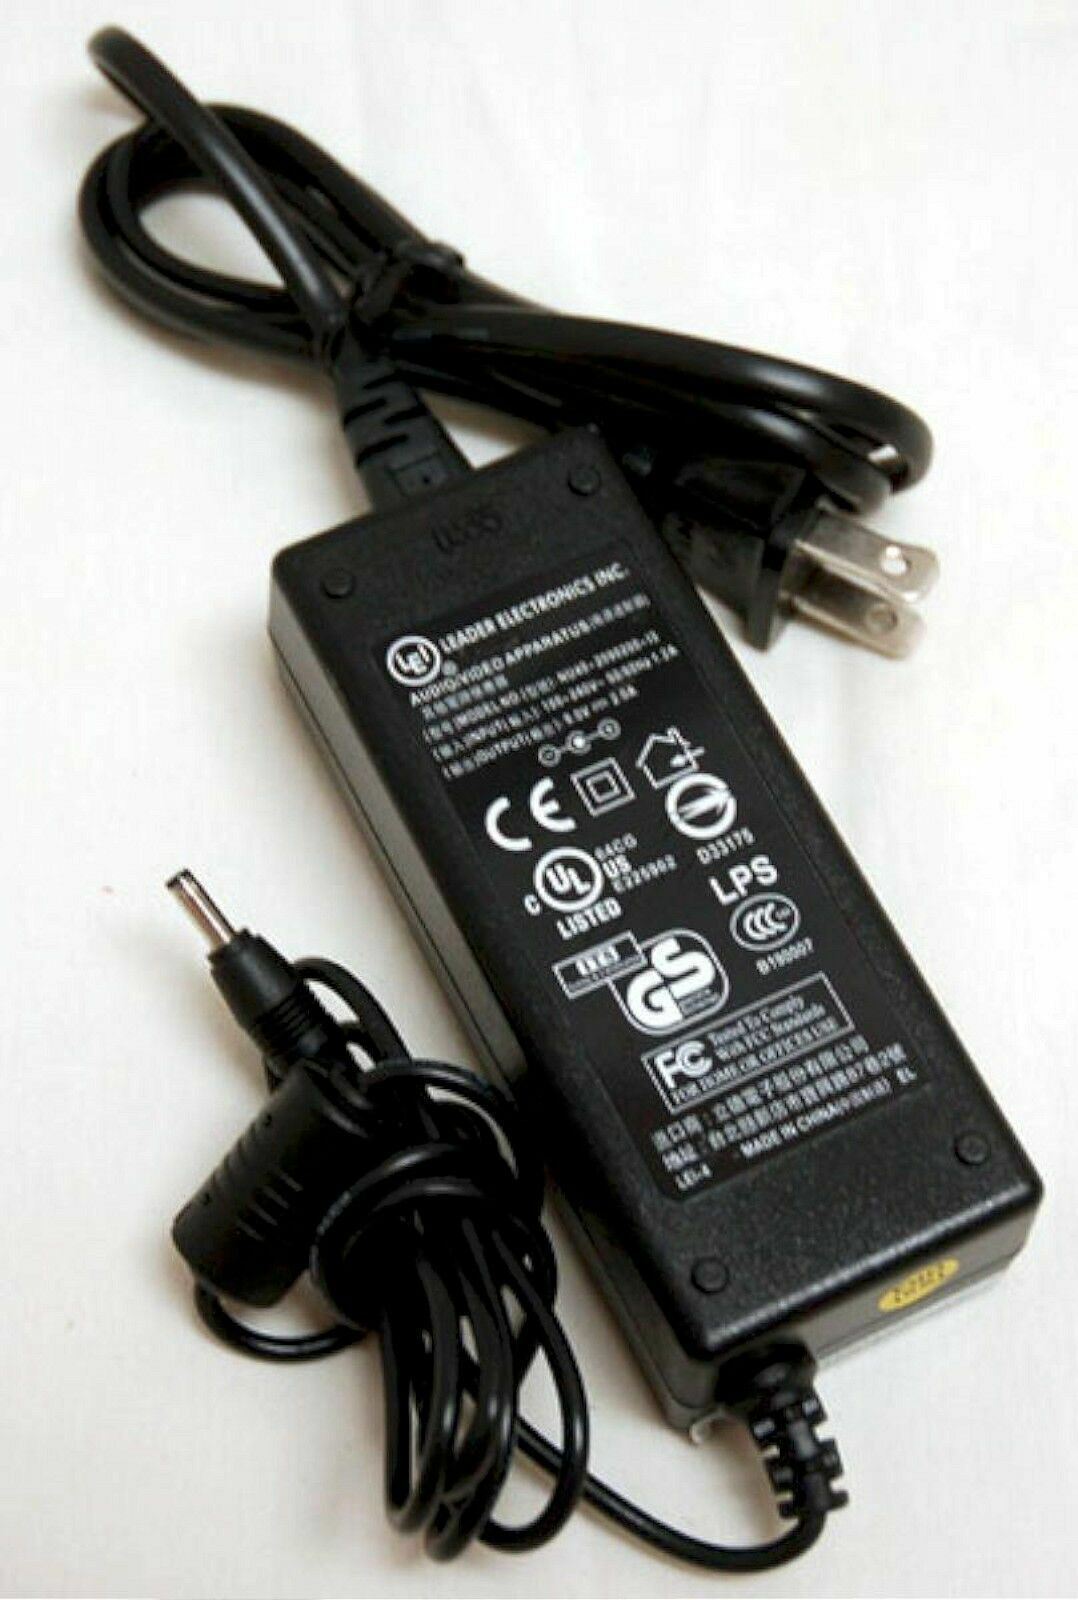 Audiovox D1700 9.0V 2.0A Portable DVD Player AC ADAPTER AMW M280 NU40-2090200-13 - $15.00